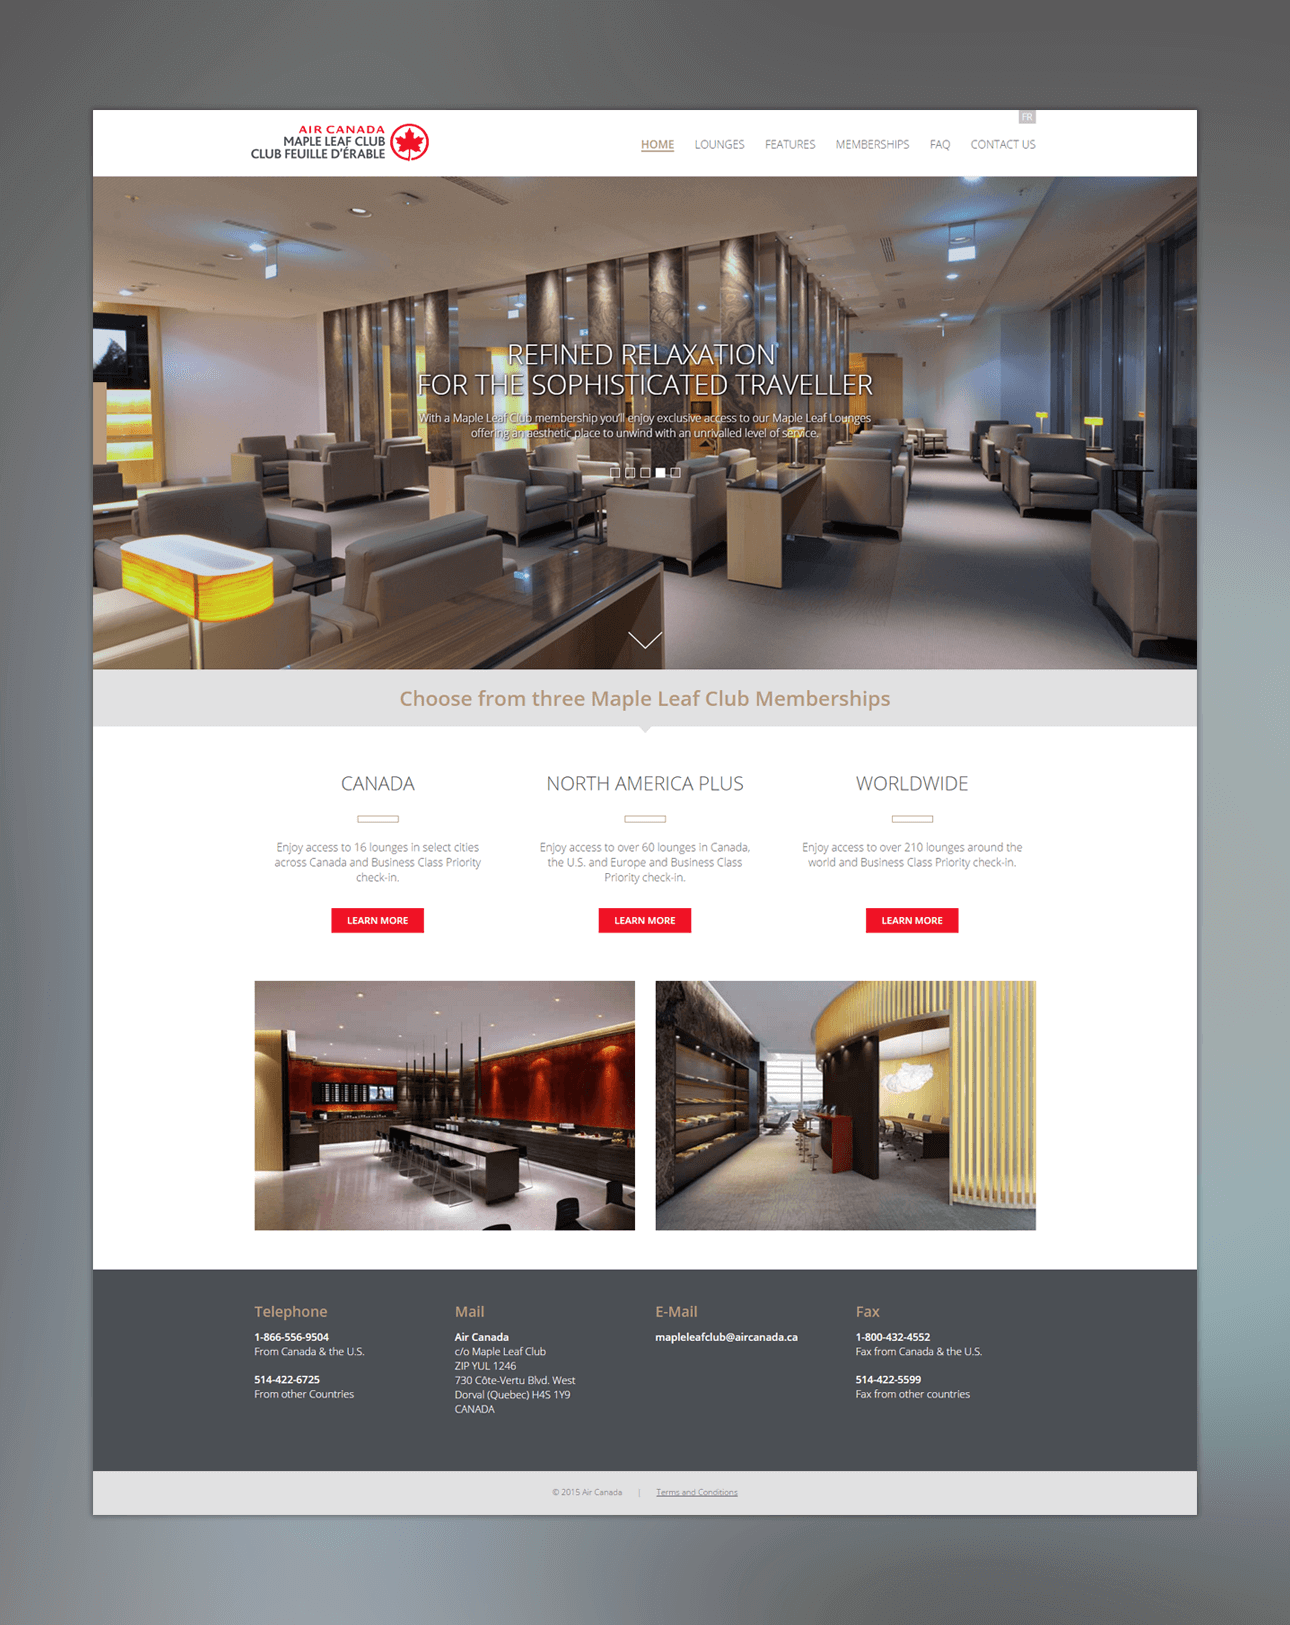 Screen captures of Air Canada's Maple Leaf Club website.